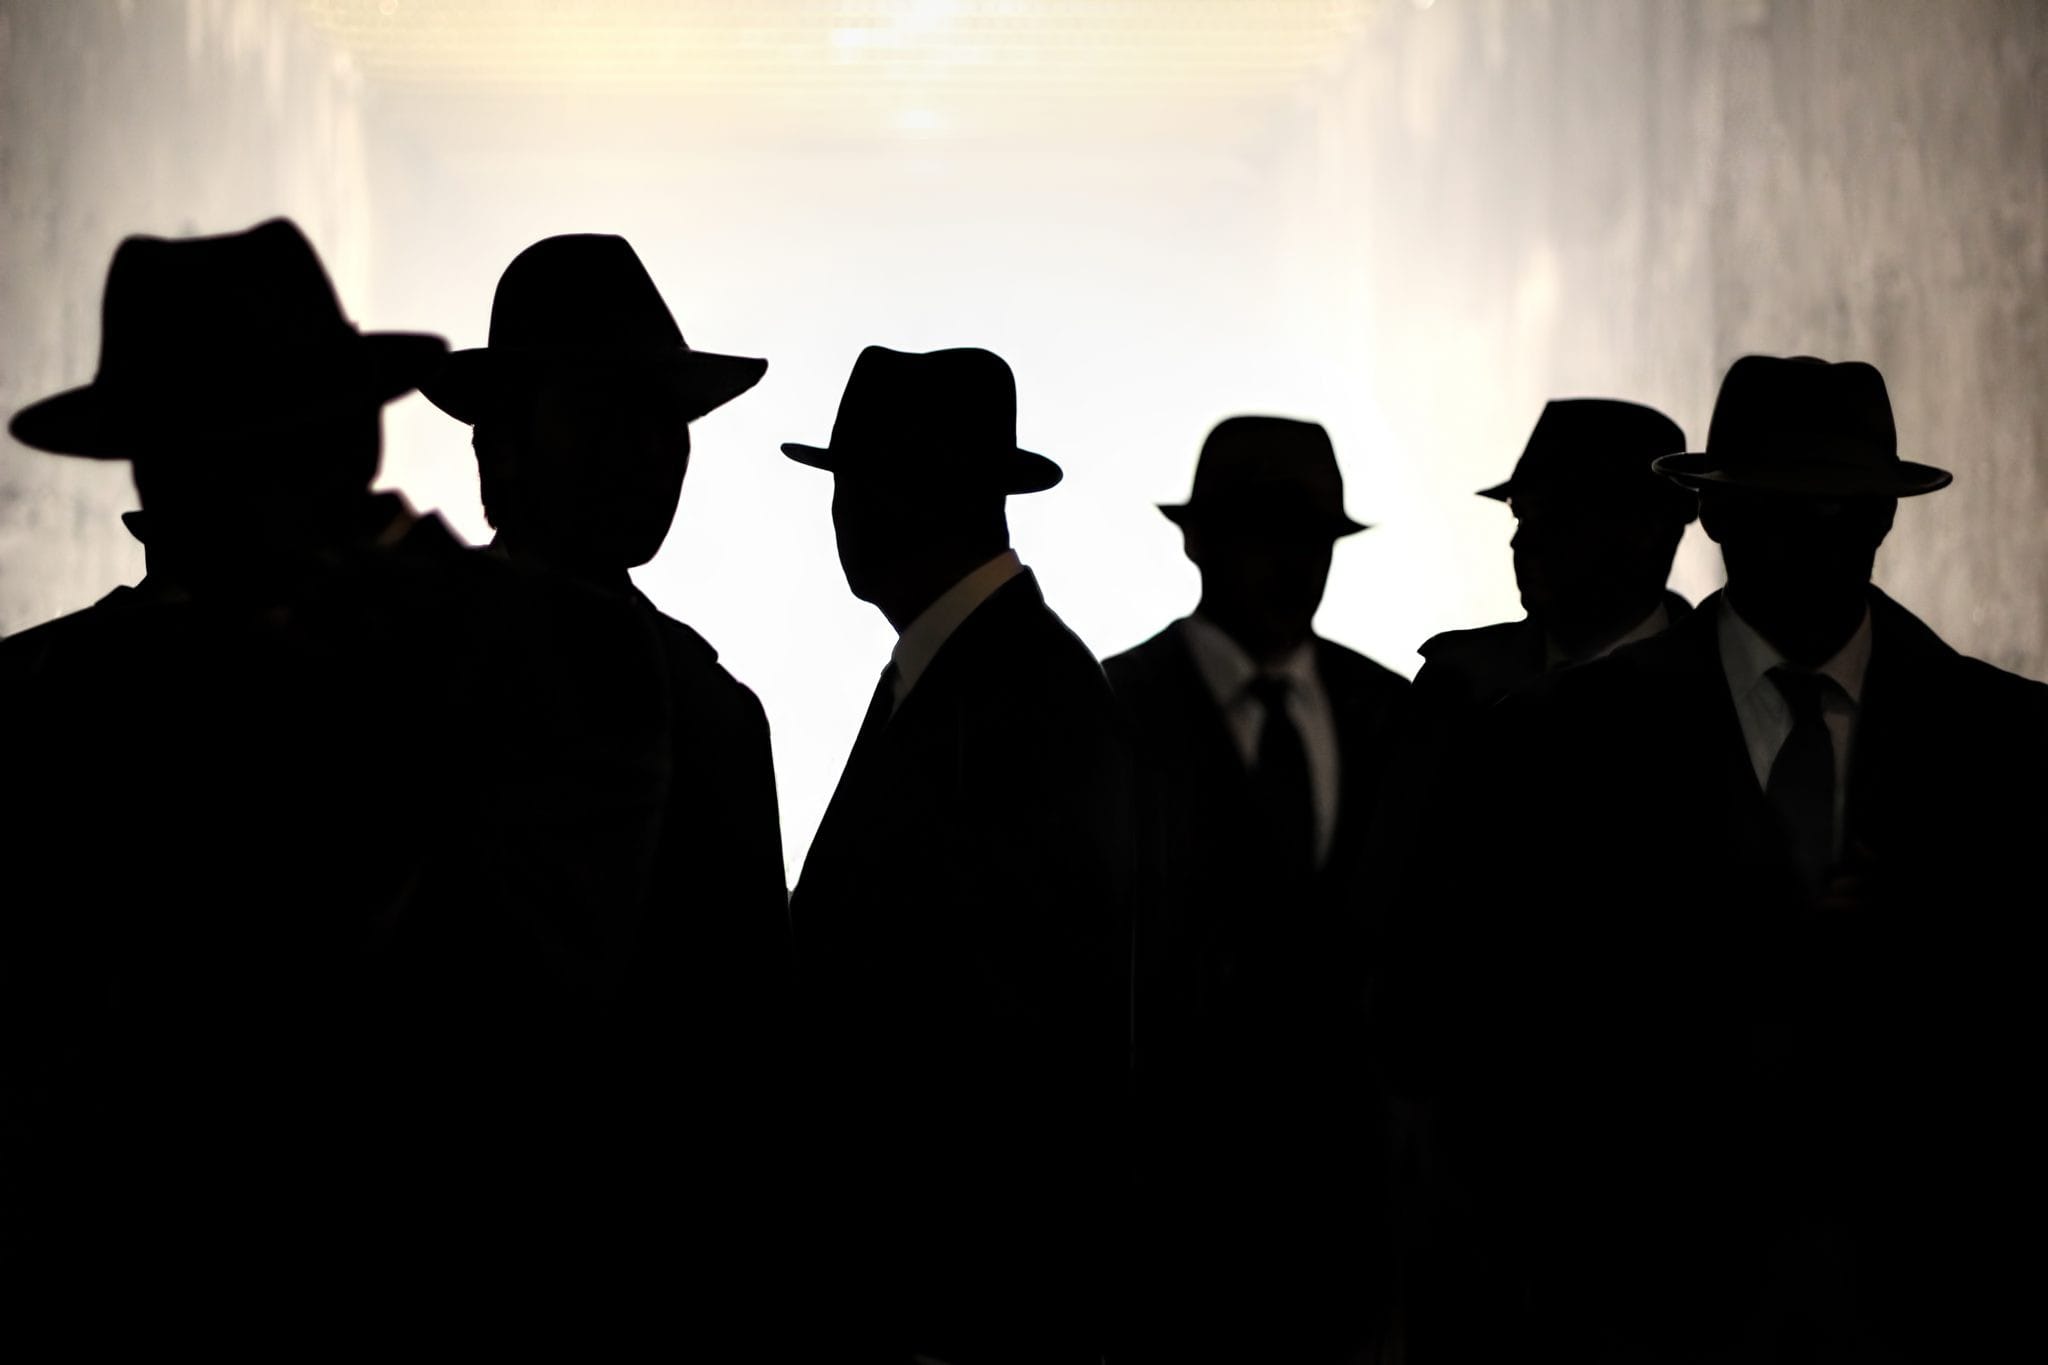 Silhouette of six men wearing identical hats and dark clothing